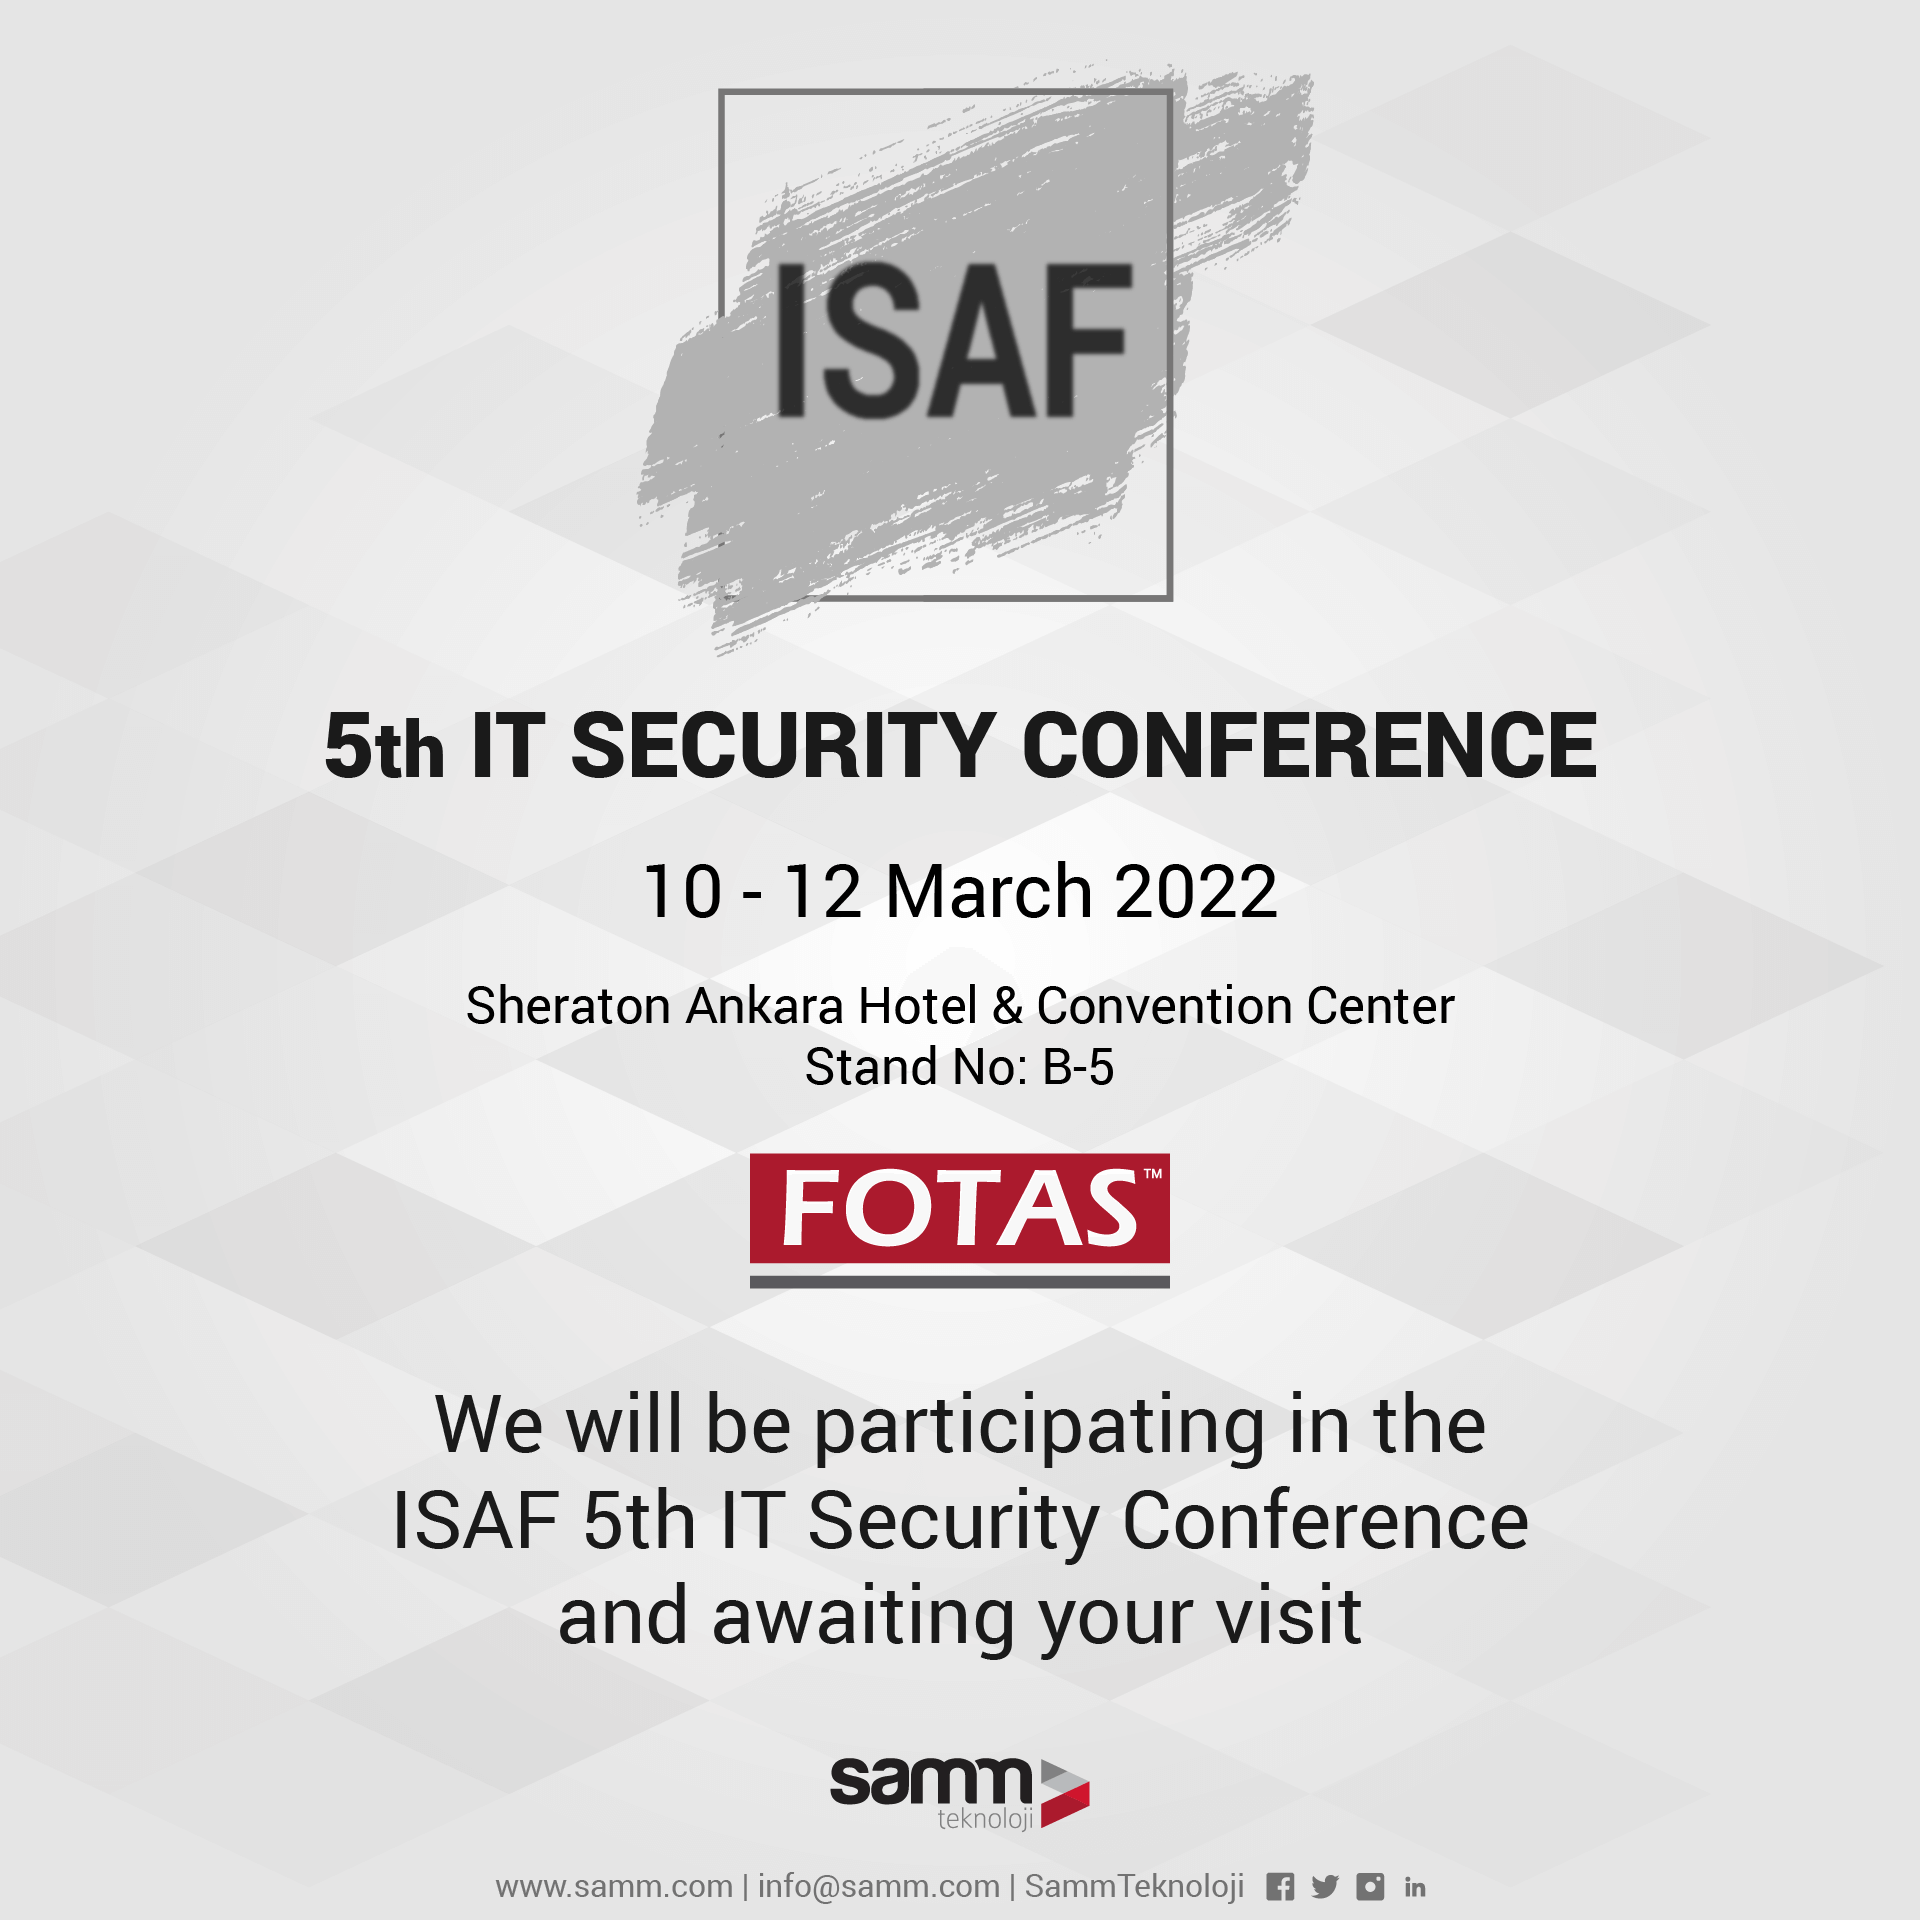 We Are Participating in The ISAF 5th IT Security Conference